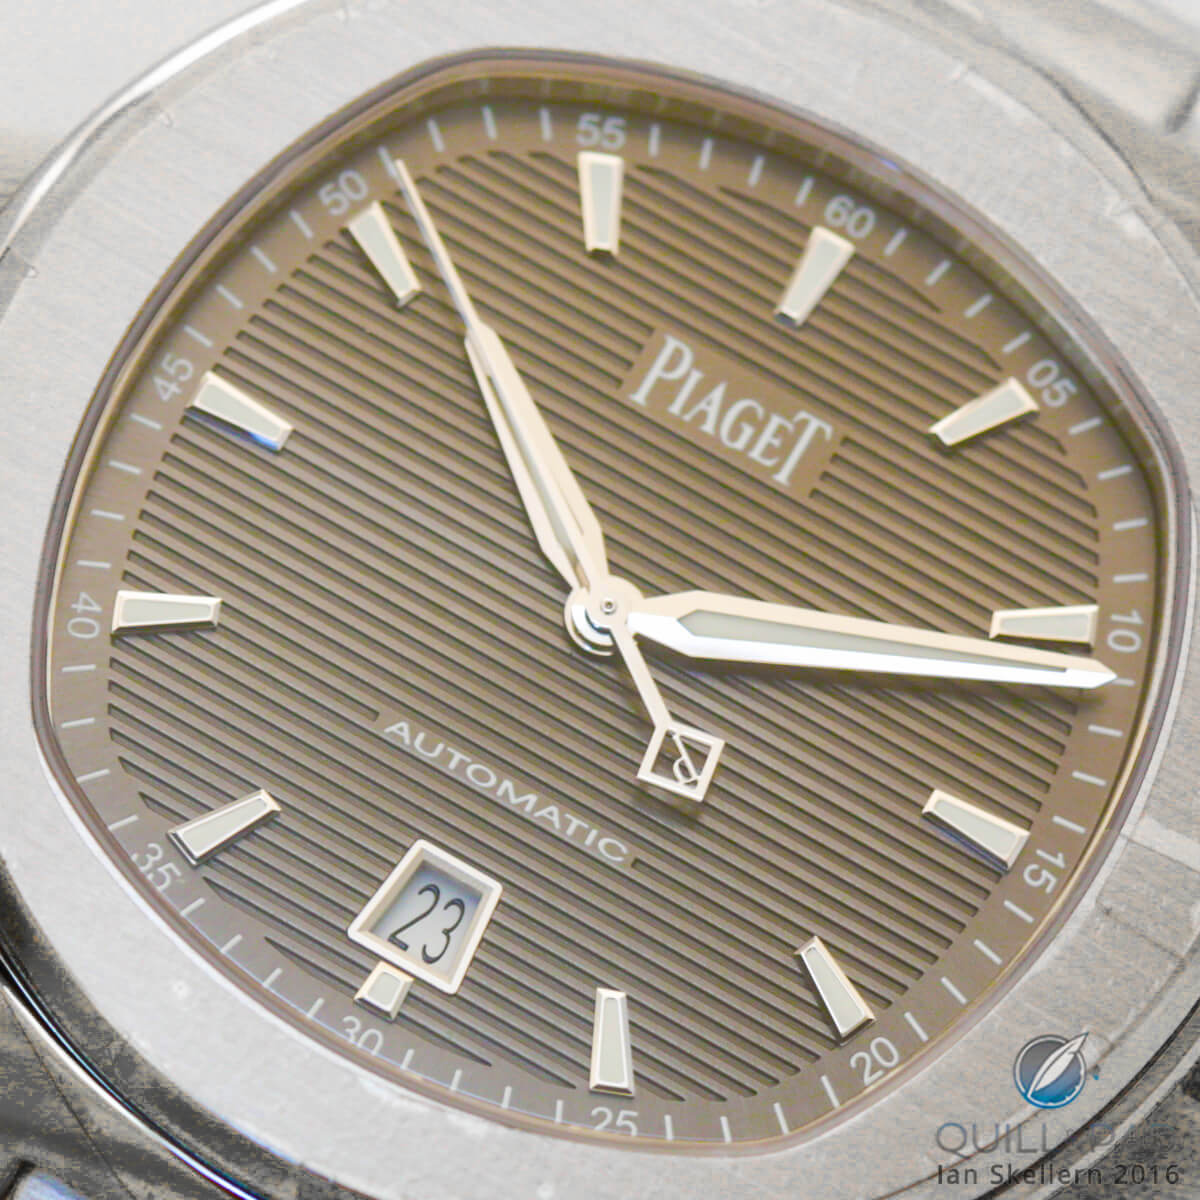 Piaget Polo S with brown dial